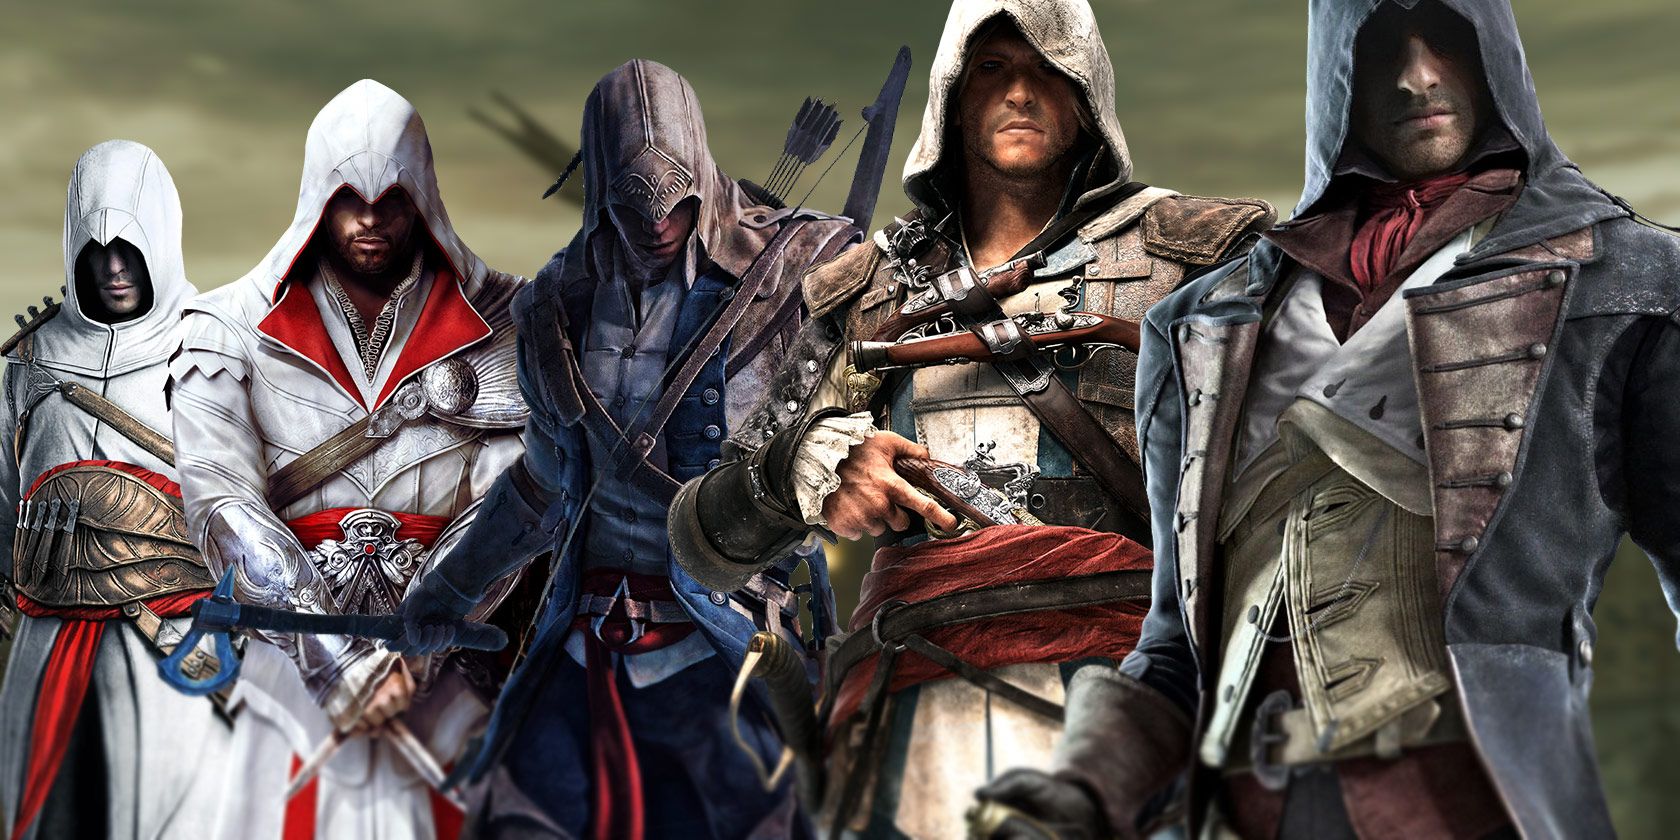 Revisiting Assassin’s creed after 15 years